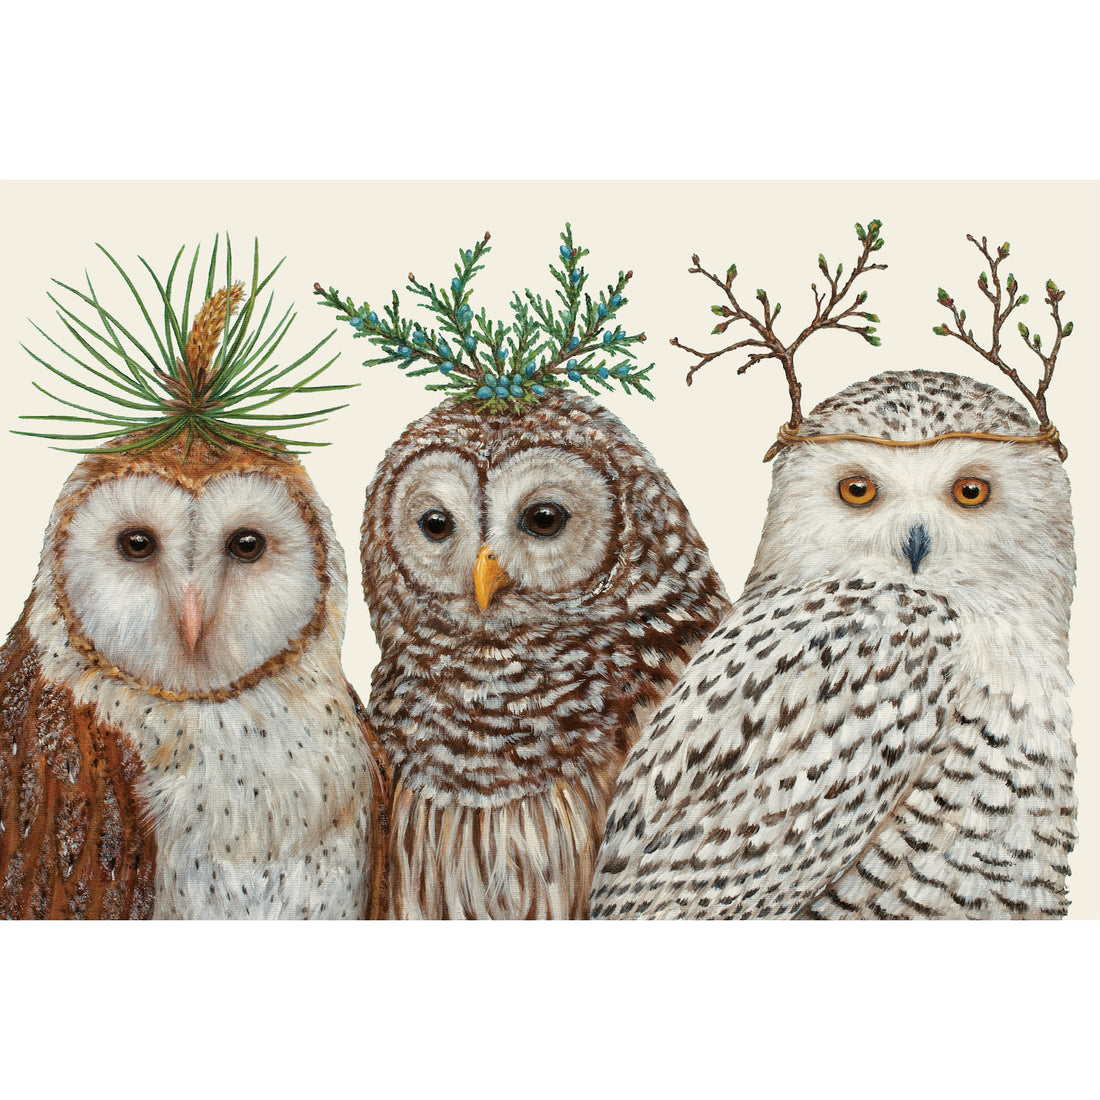 A realistic illustration of three different species of owls, each with their heads adorned with winter foliage, on a cream background.